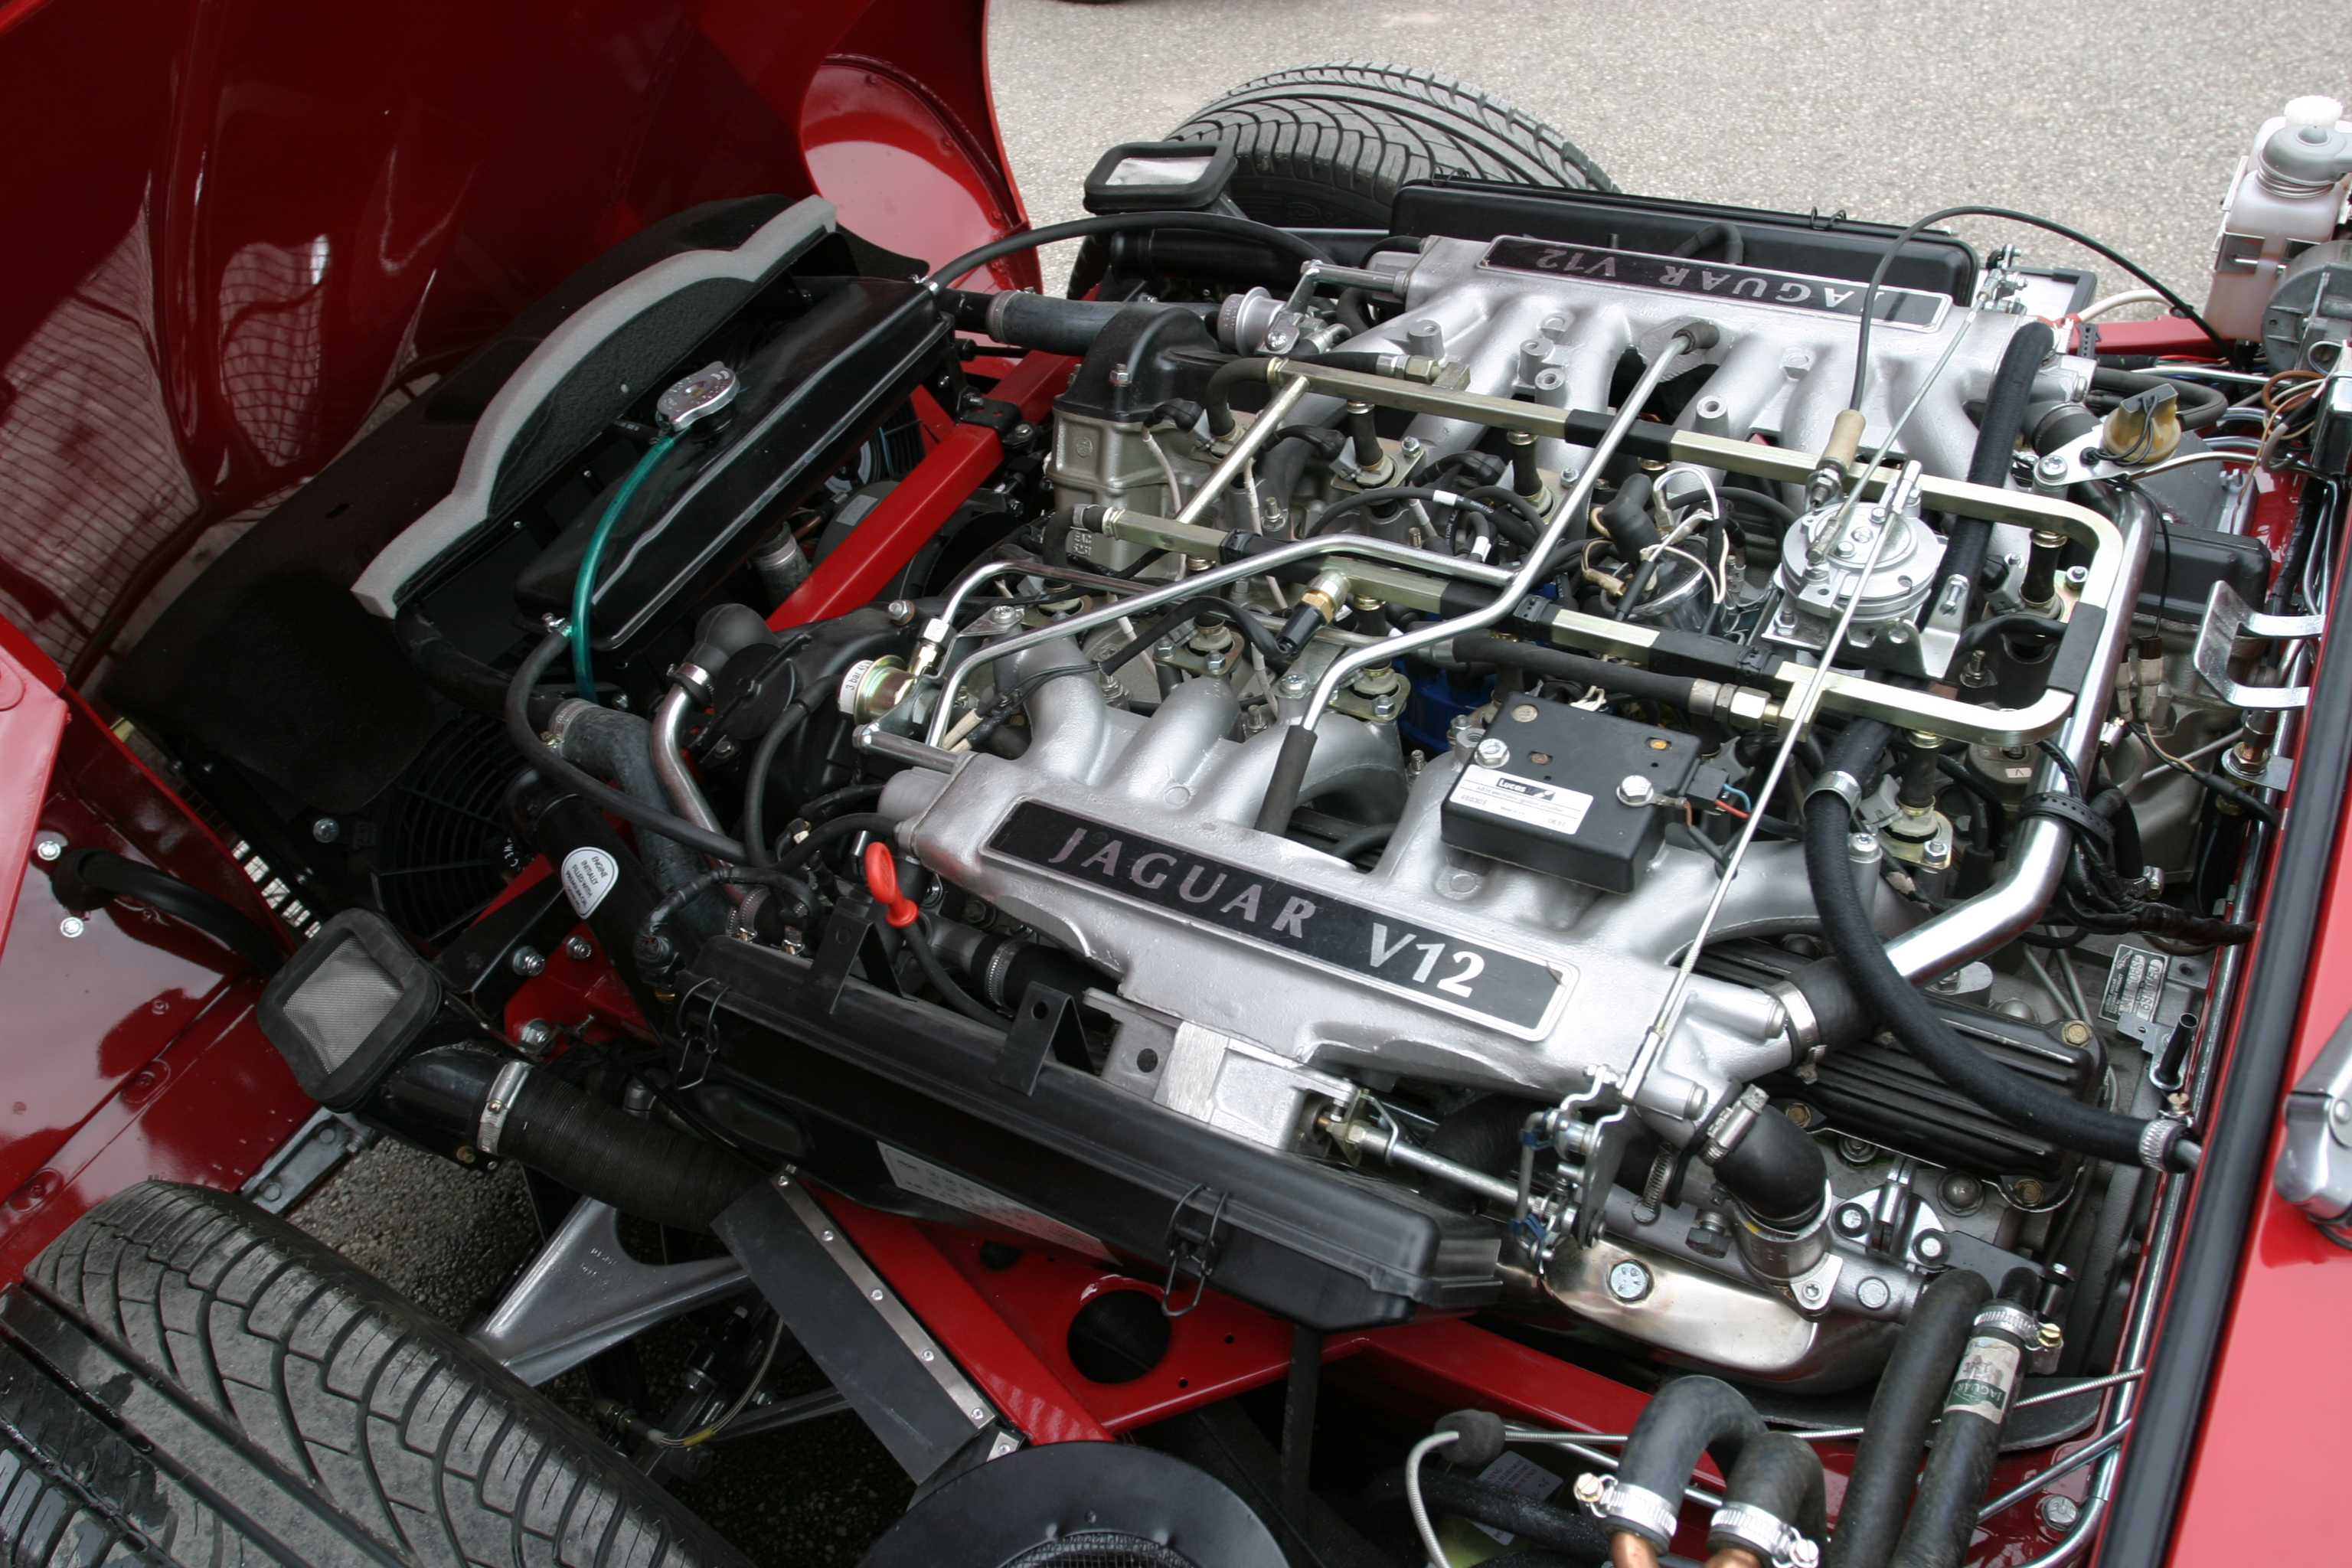 V12 E Type converted to electronic fuel injection.